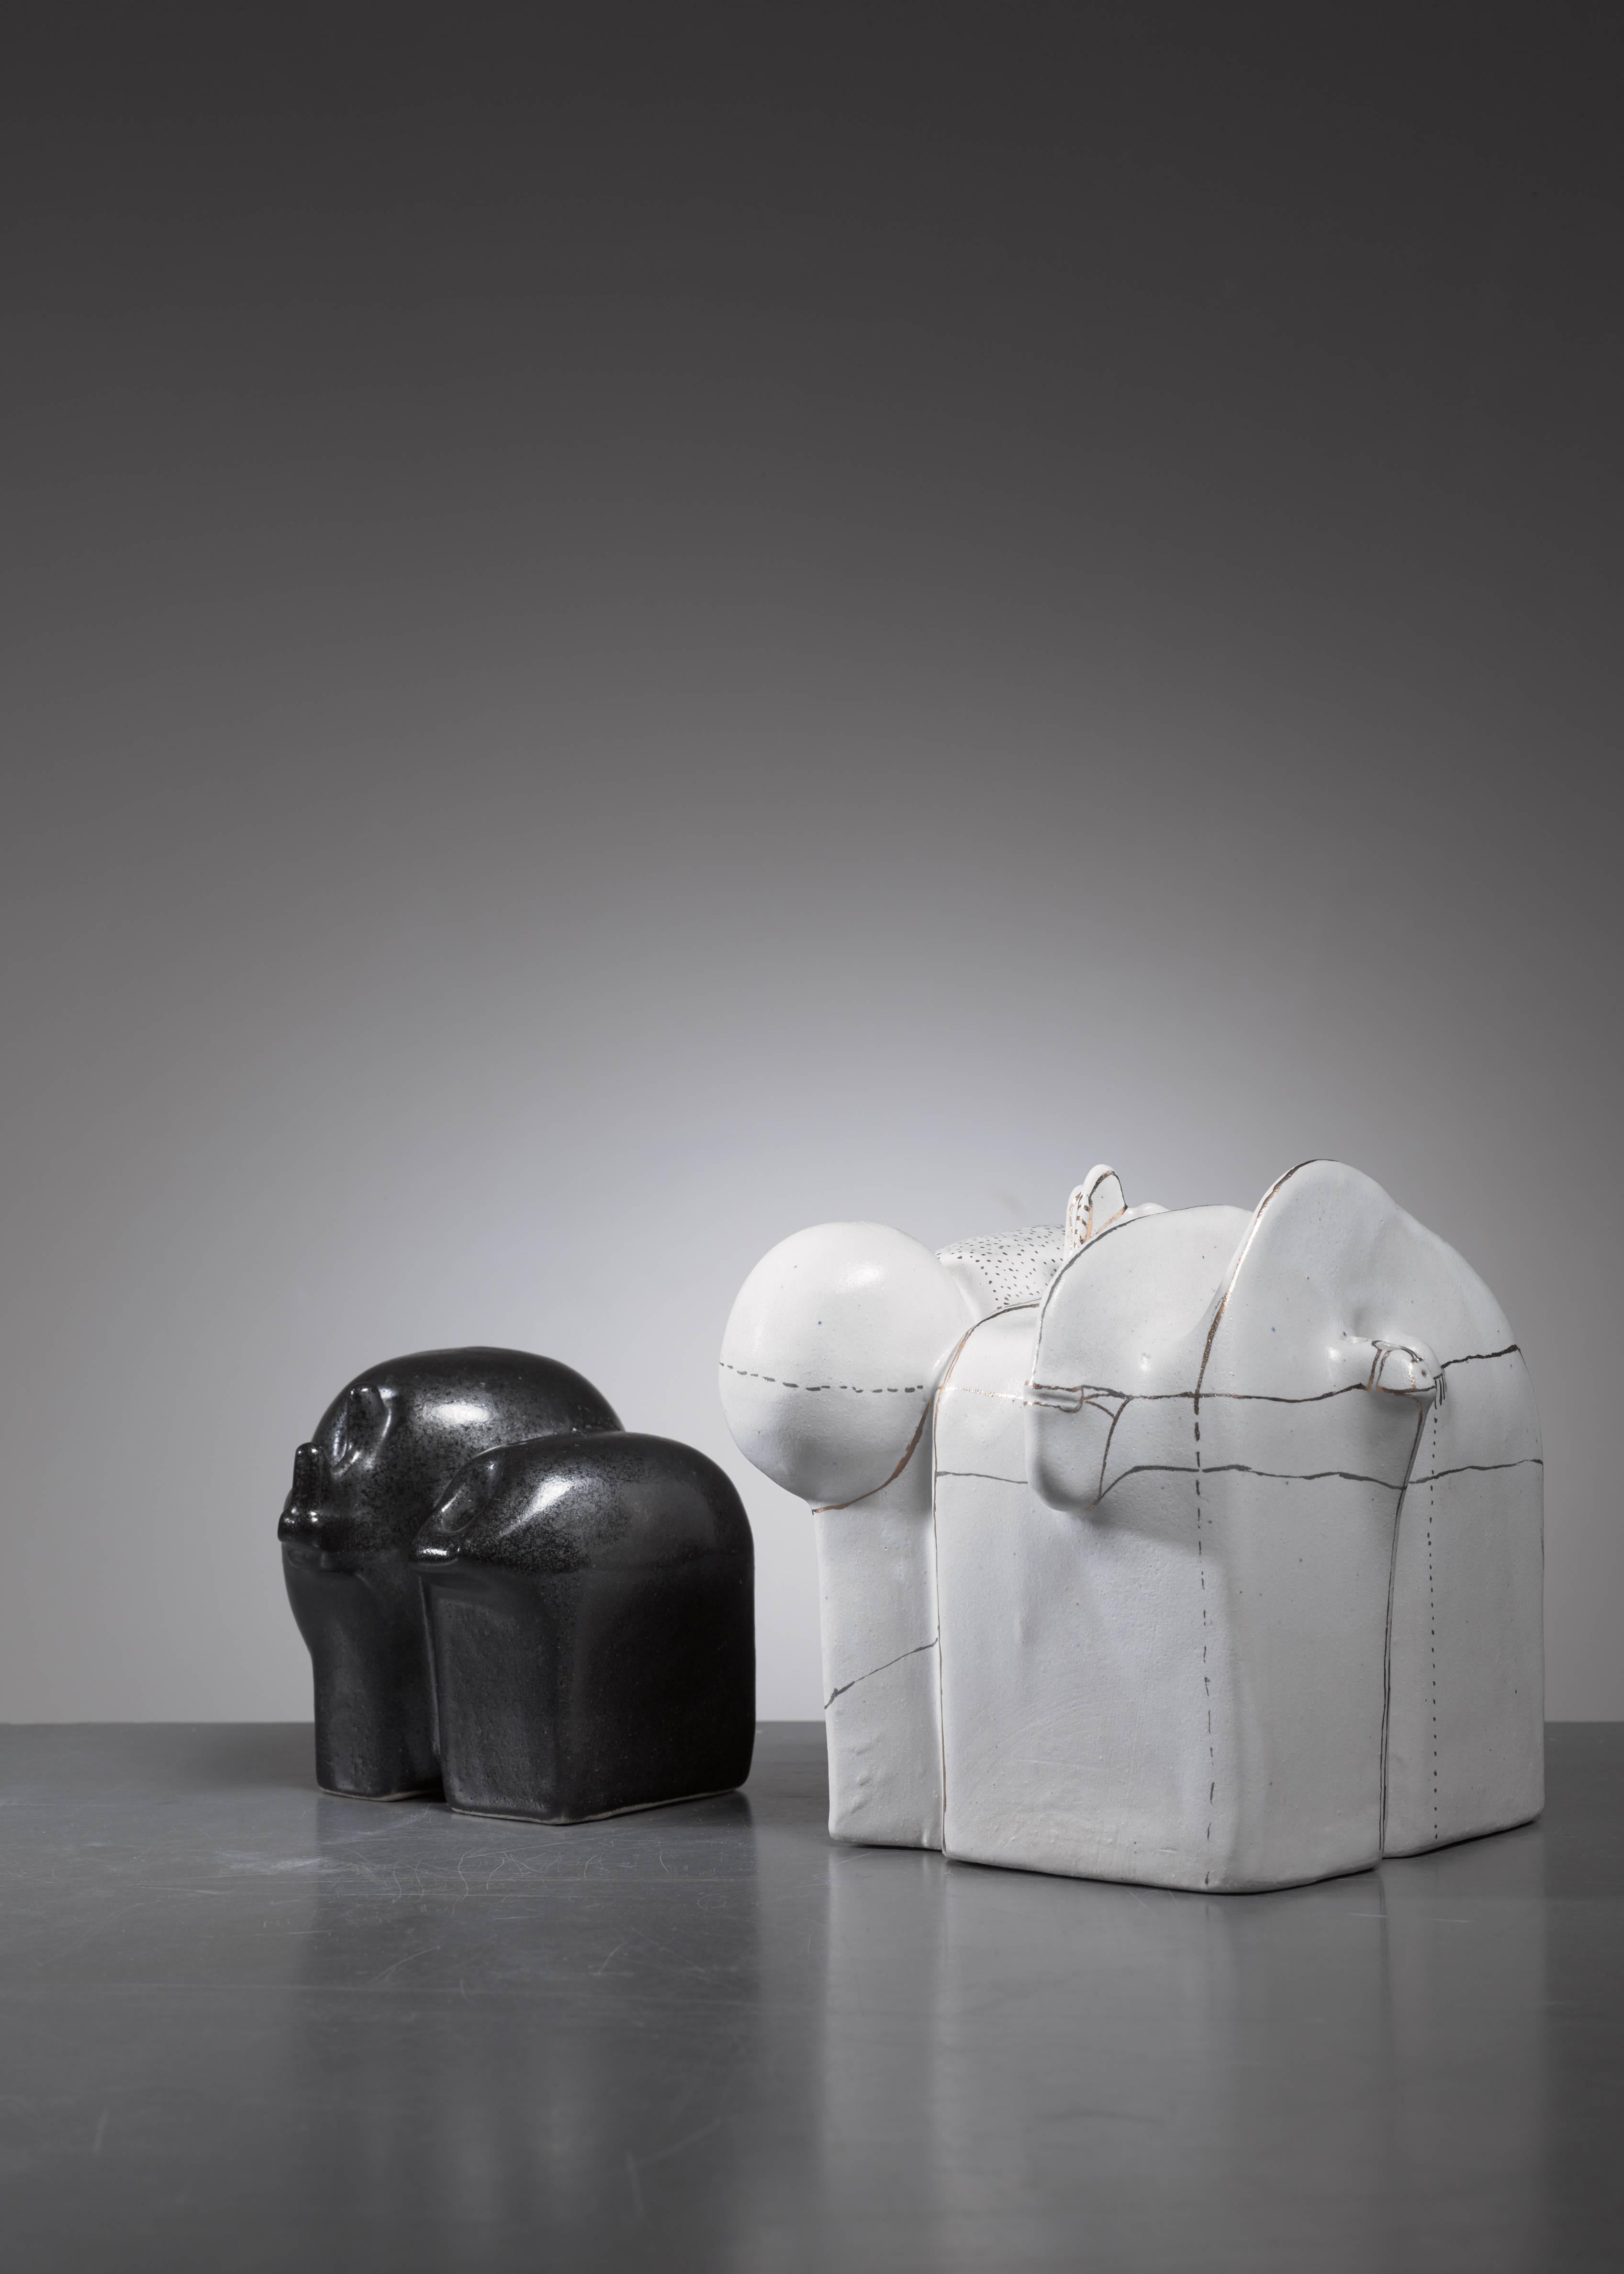 A pair of highly sculptural ceramic vases or objects by German ceramist Antje Schimpfle.

The measurements stated are of the black vase with five openings. The white piece with four openings, decorated with gold colored line and dot decorations,